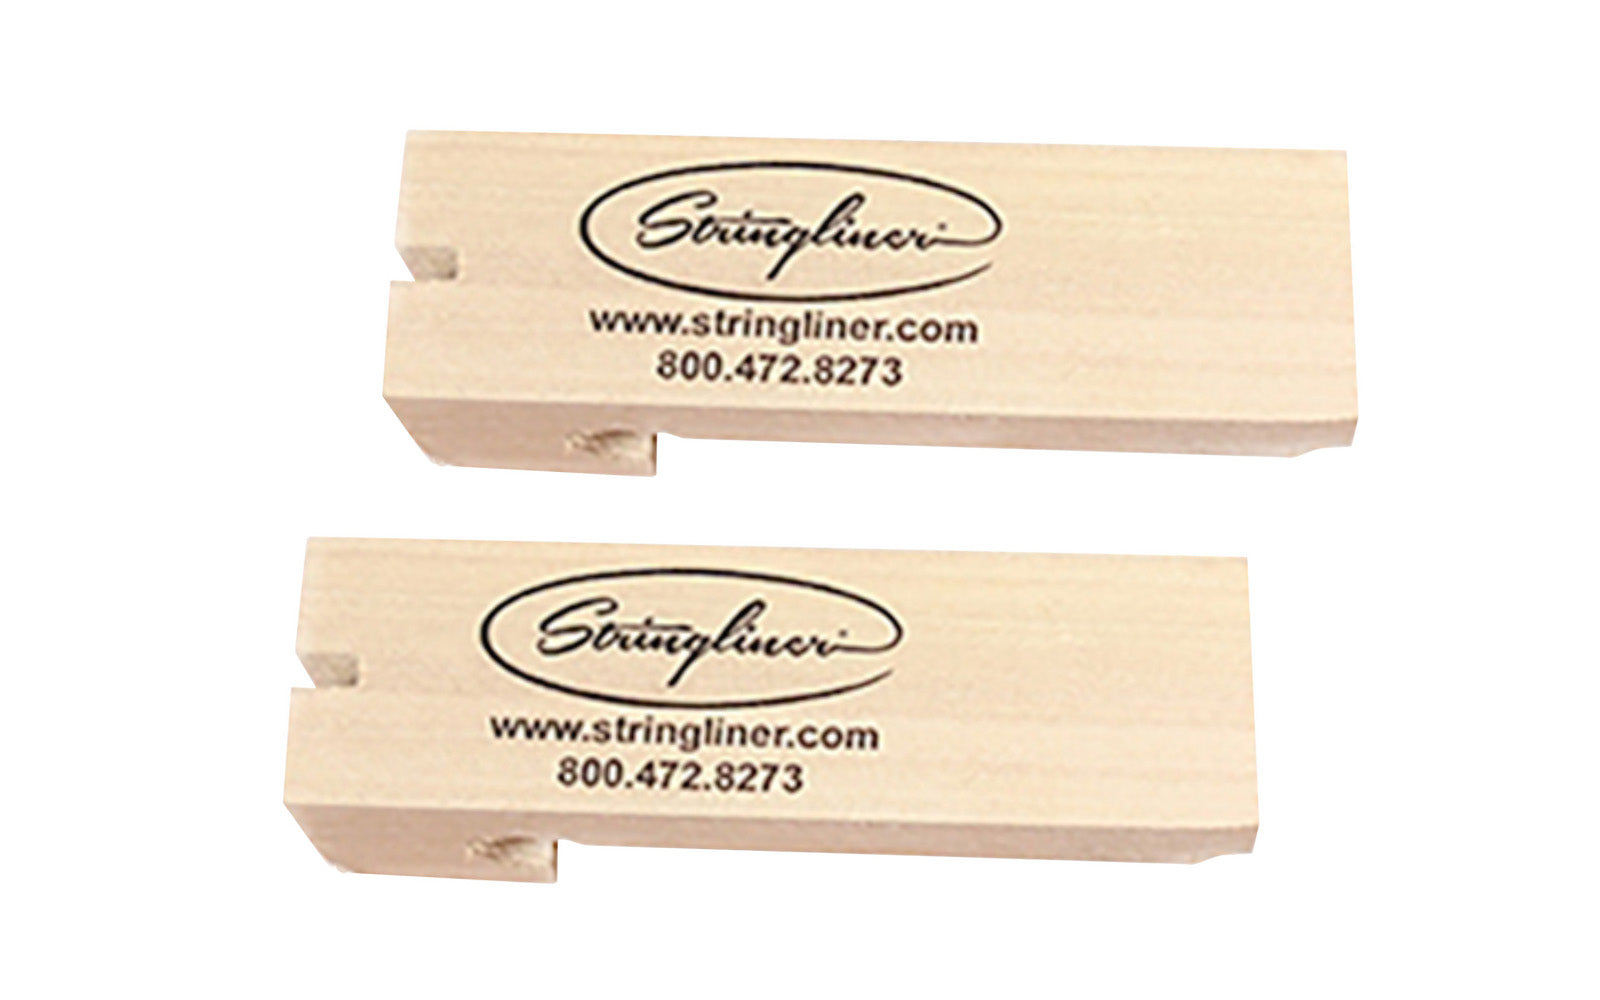 These Stringliner Line Blocks are made of 4" long wood & used in conjunction with mason’s line to set a level line course & corners when working with bricks & blocks. Wooden Line Blocks - 2 Pack. Stringliner Model 25943. Made in USA